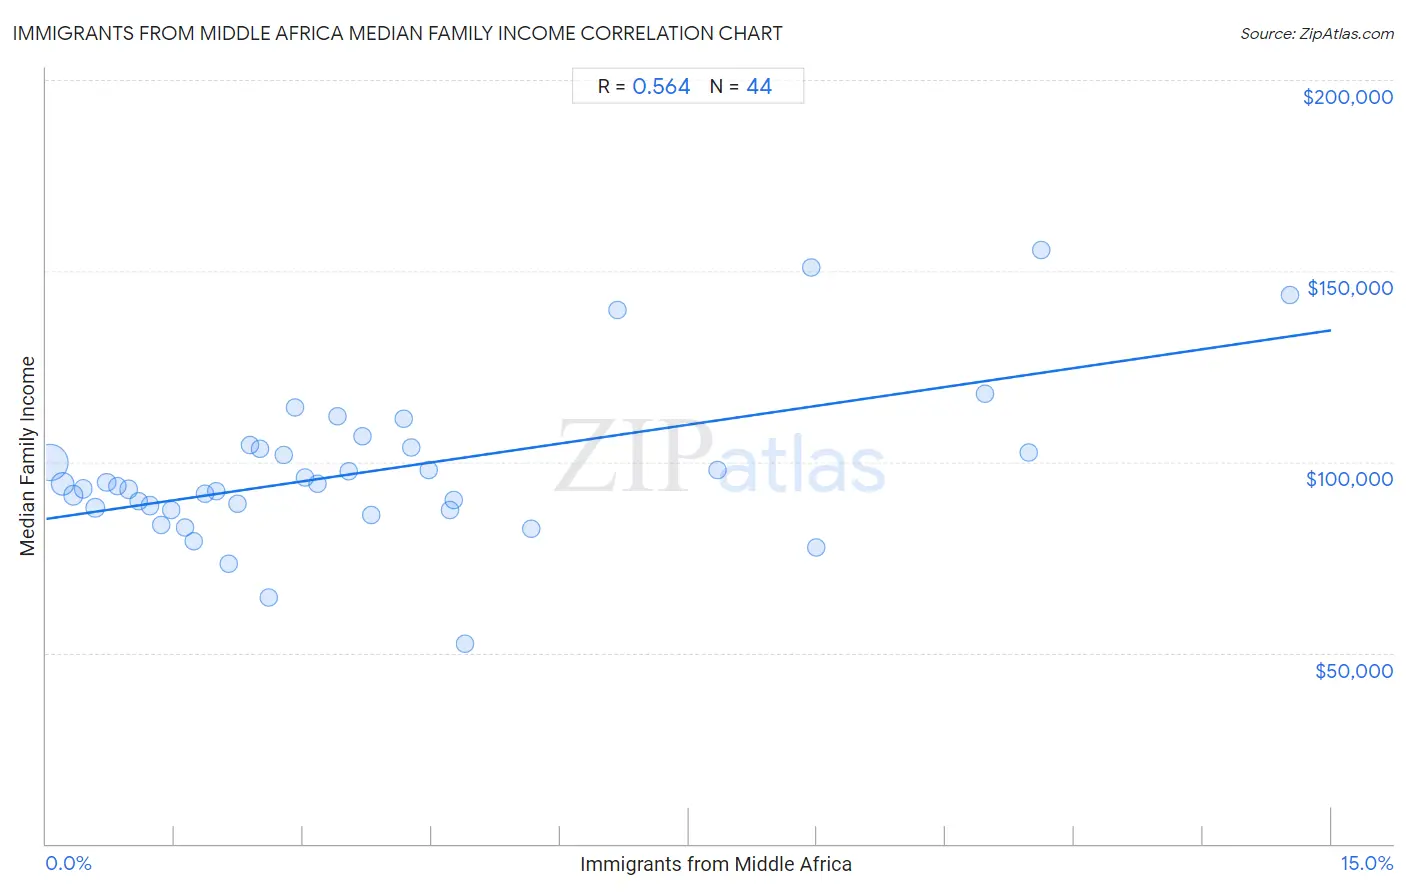 Immigrants from Middle Africa Median Family Income